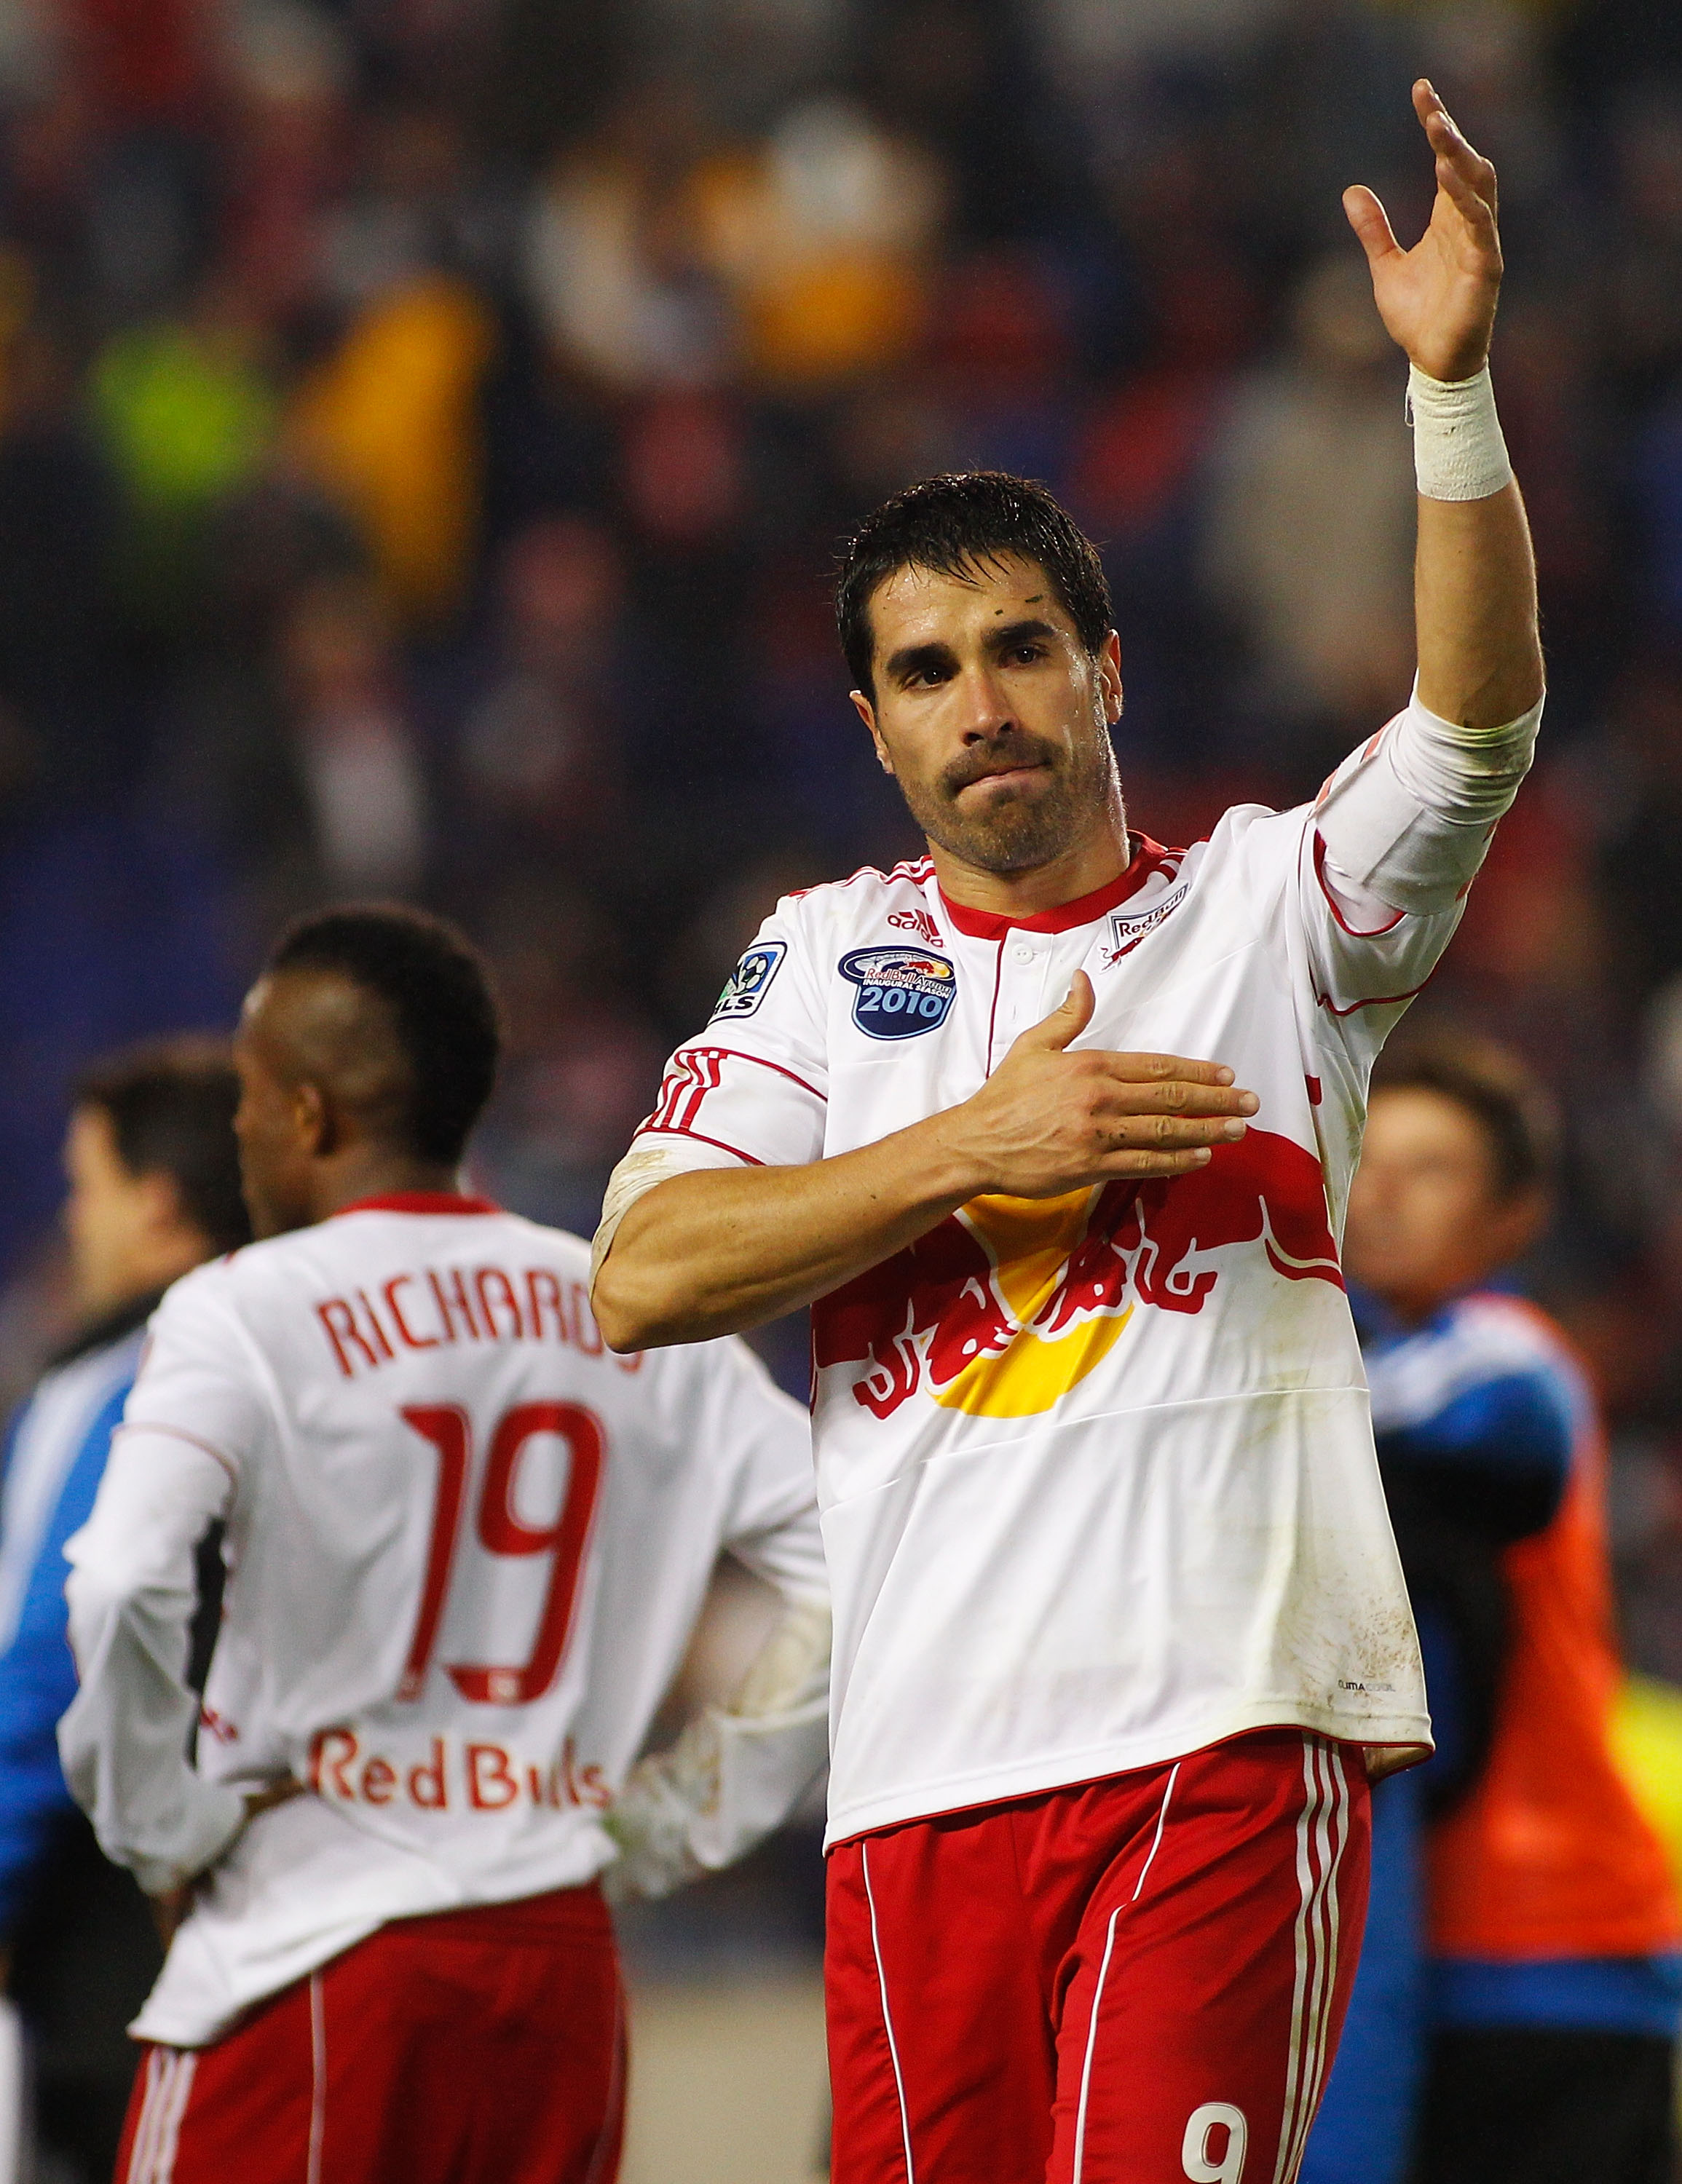 HARRISON, NJ - NOVEMBER 04:  Juan Pablo Angel #9 of the New York Red Bulls salutes the crowd after losing to the San Jose Earthquakes 3-1 during the 2nd Leg of the MLS playoffs on November 4, 2010 at Red Bull Arena in Harrison, New Jersey.  (Photo by Mike